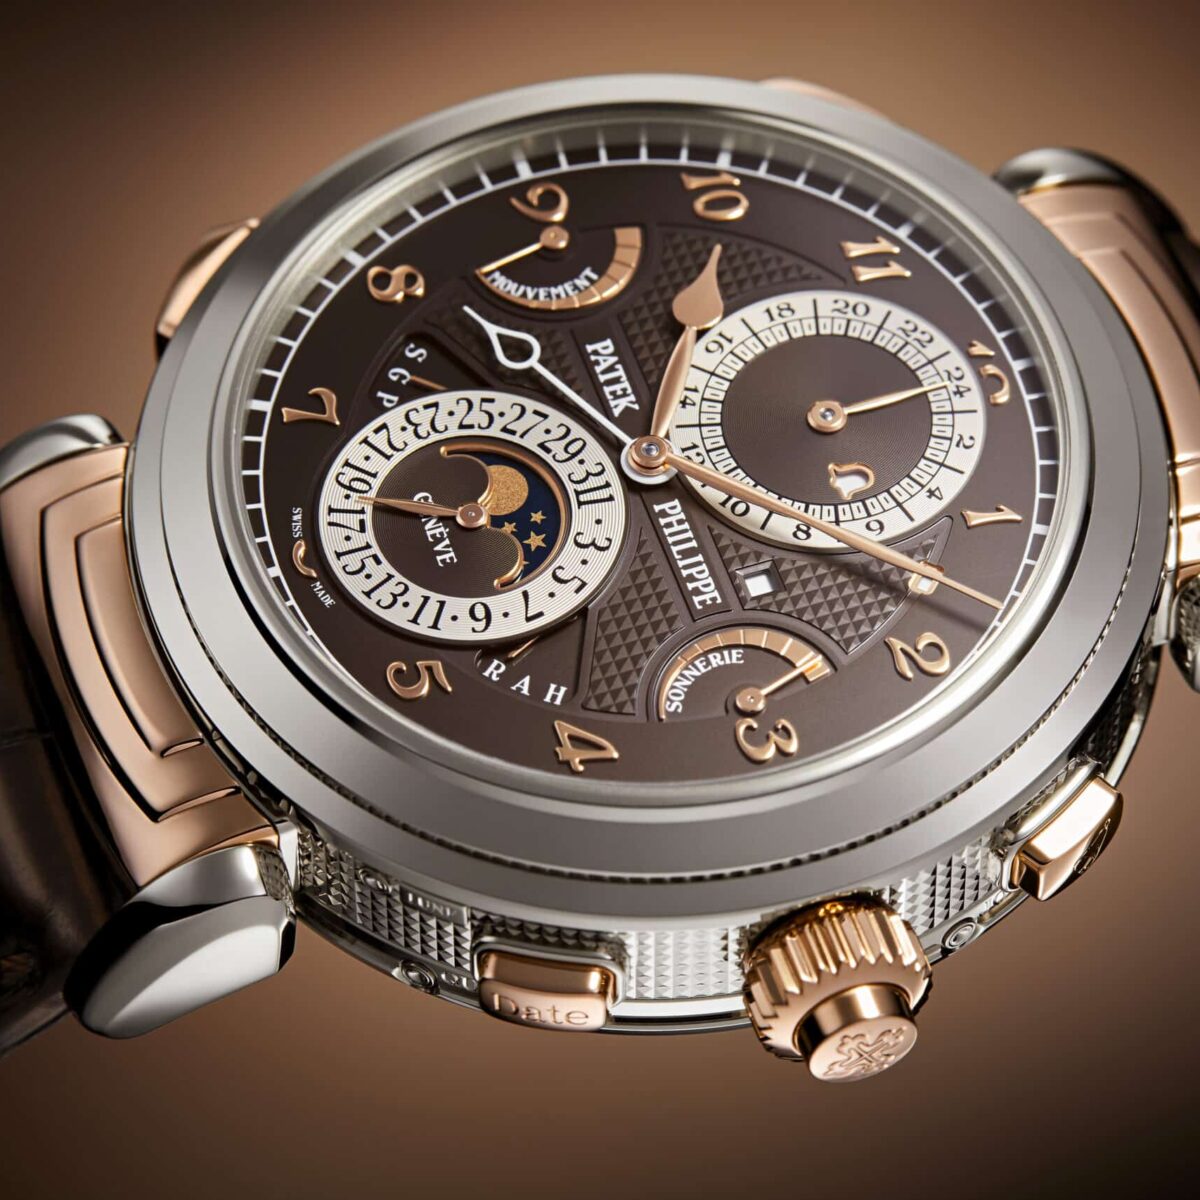 Patek Philippe First With Grandmaster Chime In White And Rose Gold 